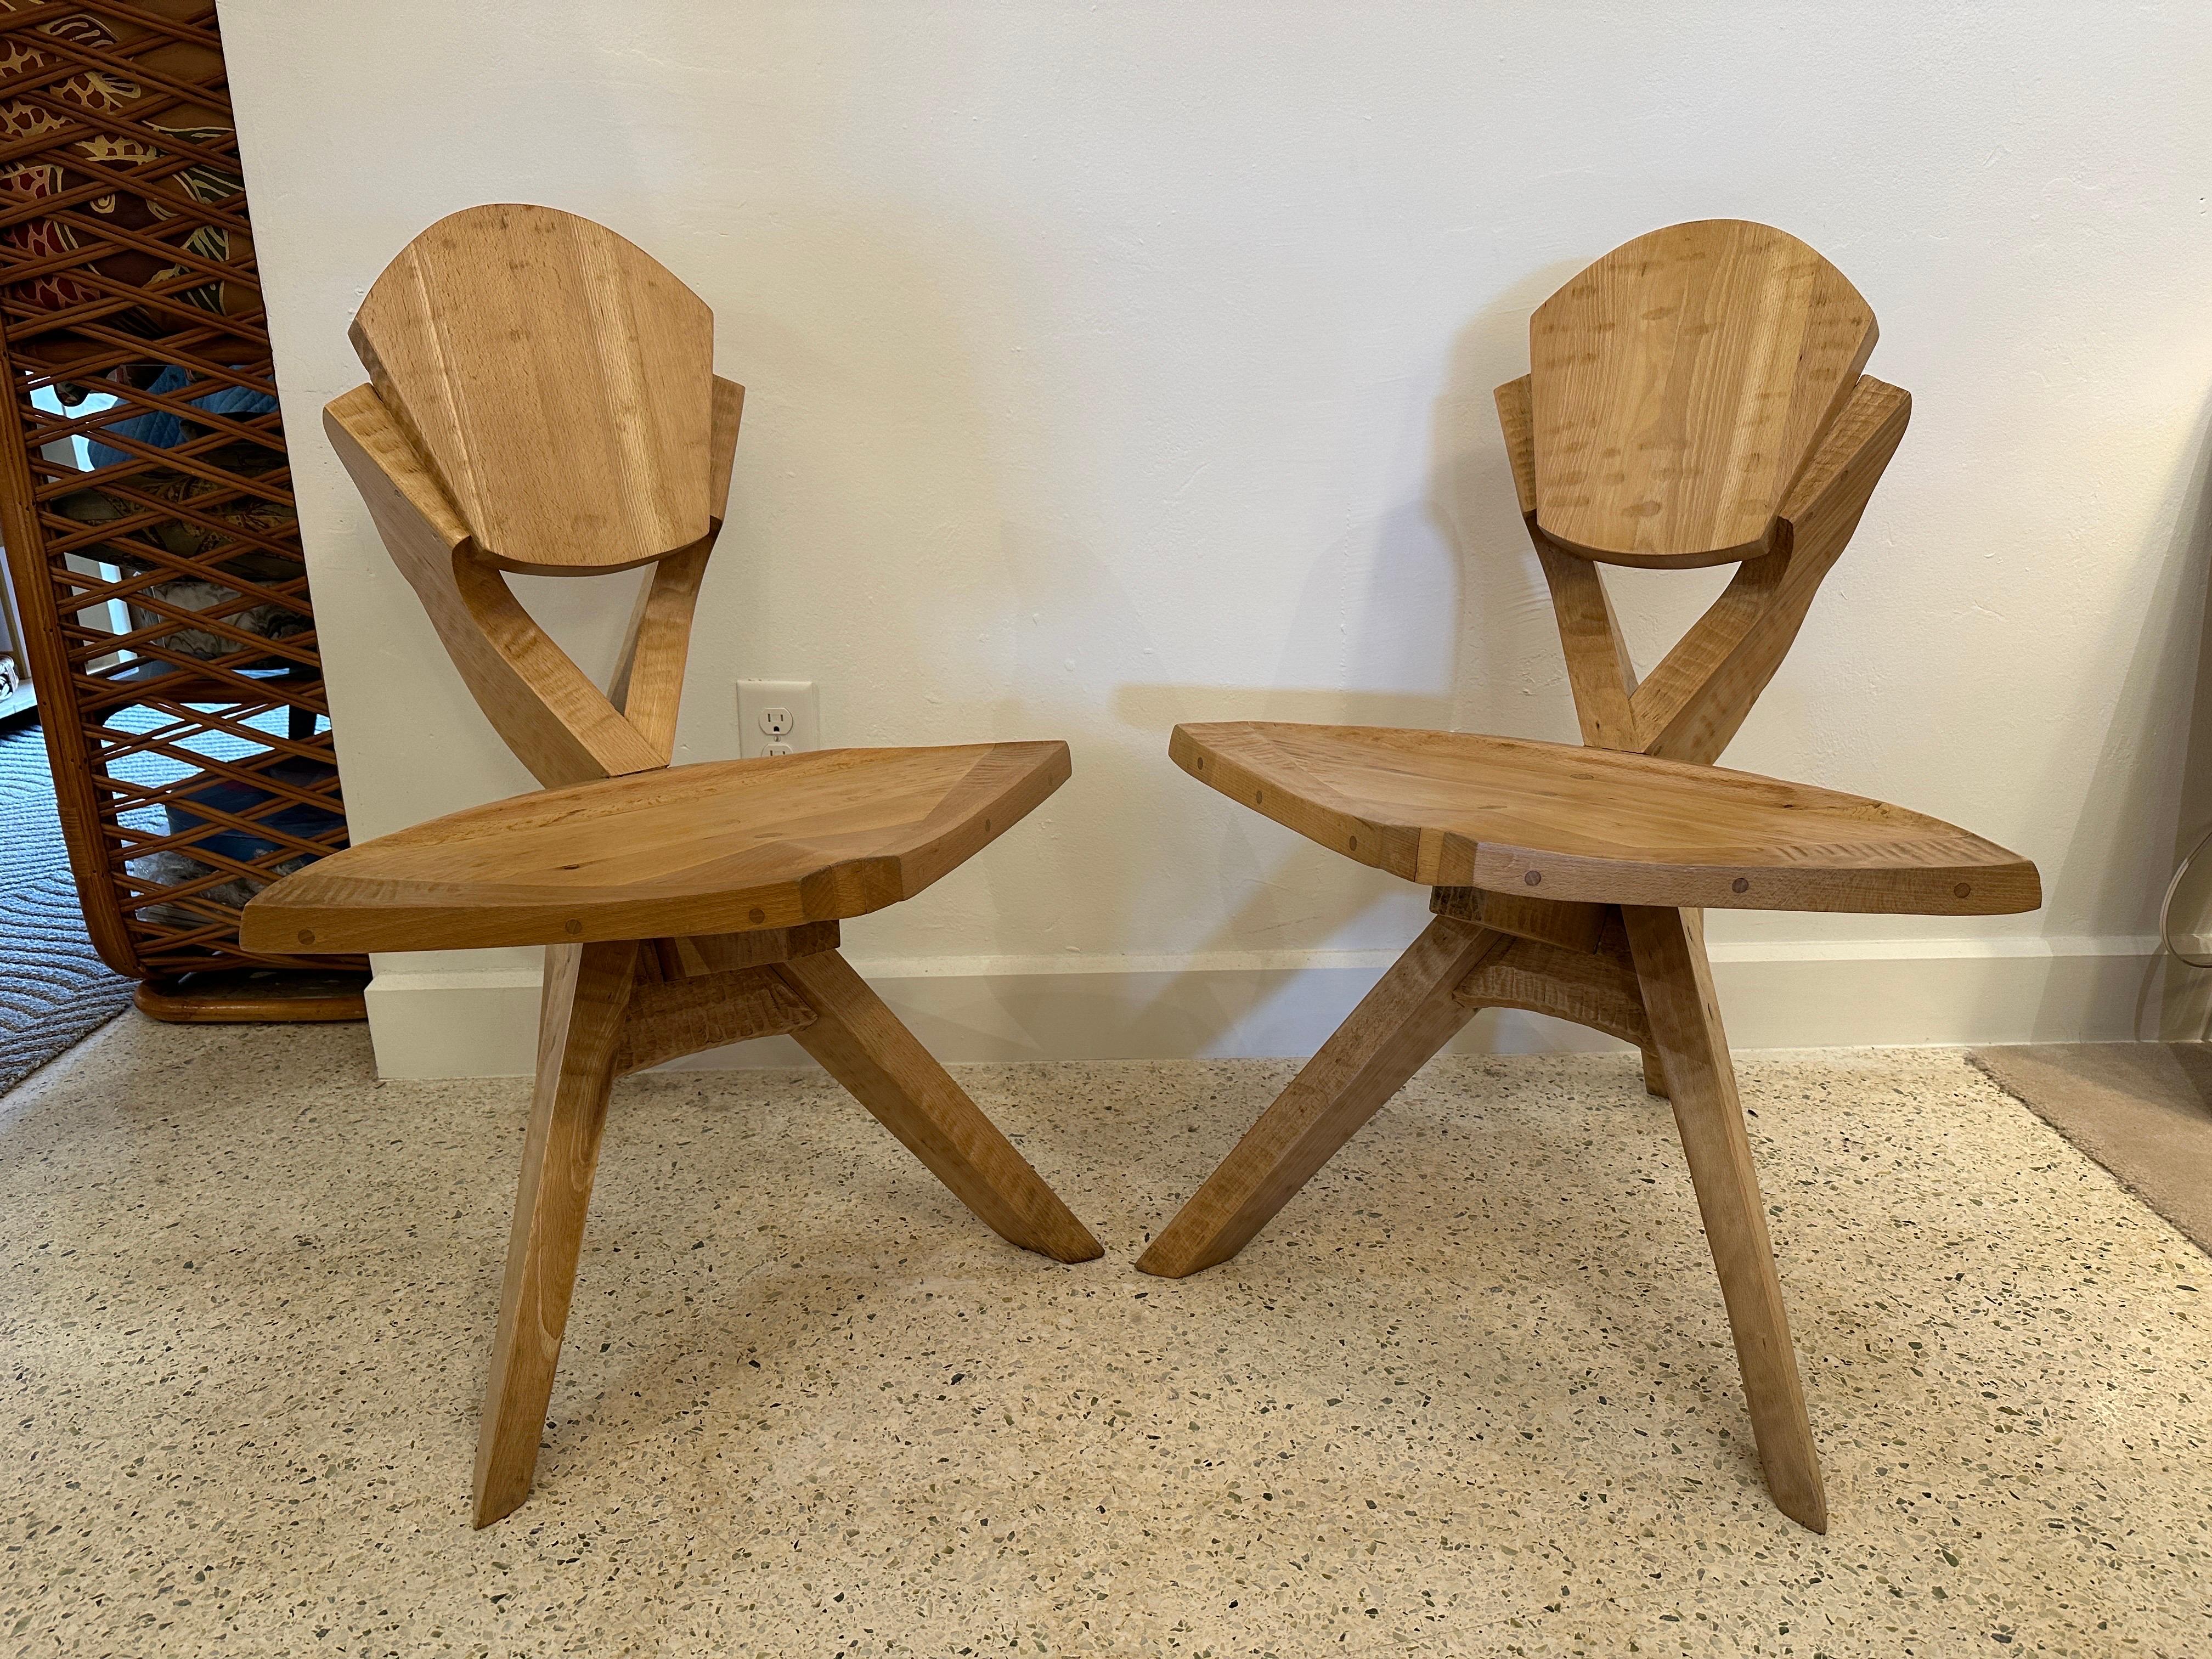 This pair of hand crafted sculptural wood chairs feature 3 legs and extraordinary details to back rest and seat - SEE detail images and video provided. Architecturally wonderful!  THIS ITEM IS LOCATED AND WILL SHIP FROM OUR MIAMI, FLORIDA